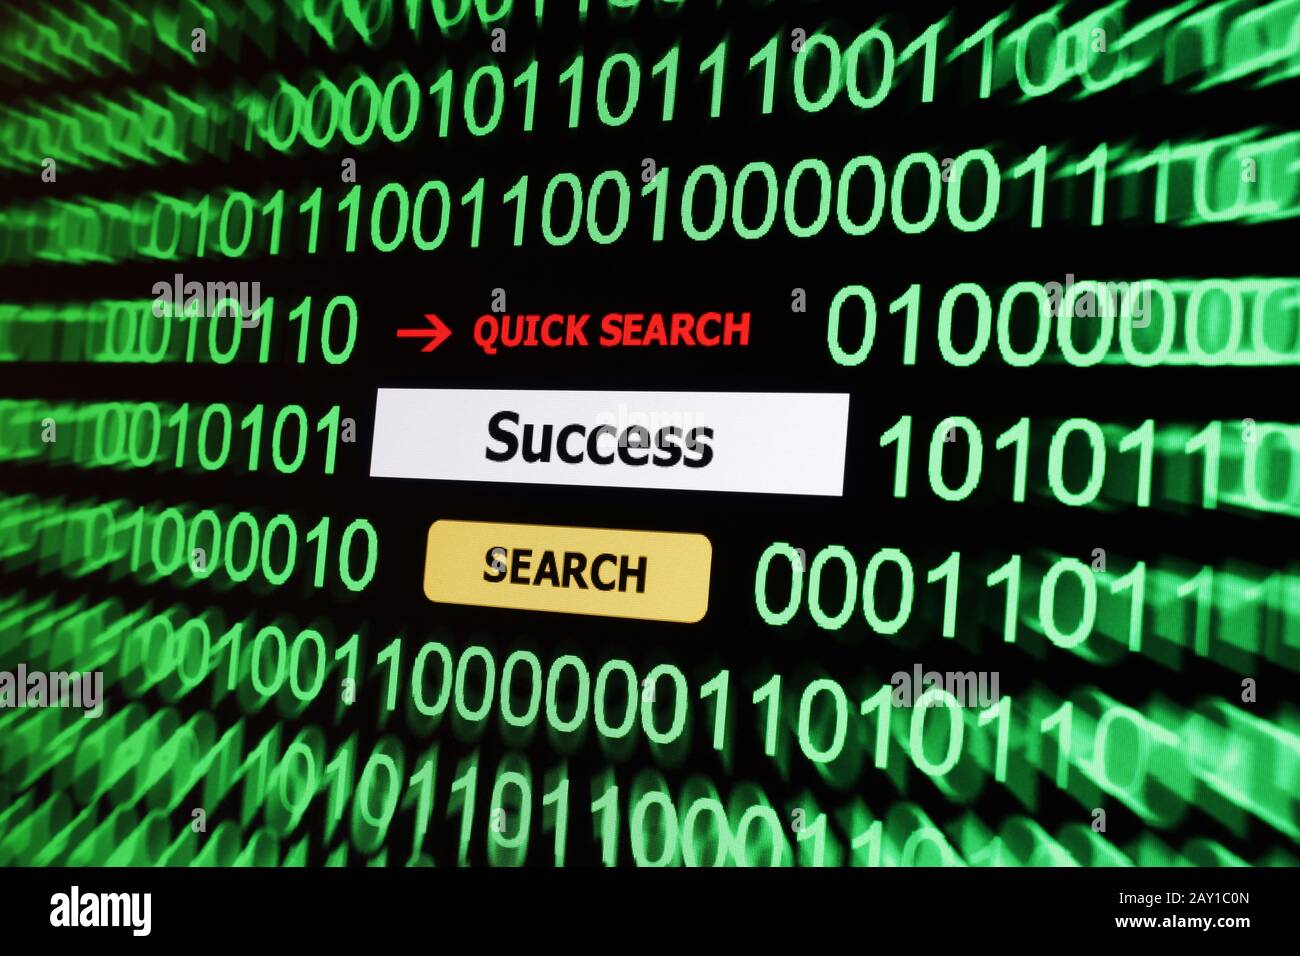 Search for success Stock Photo